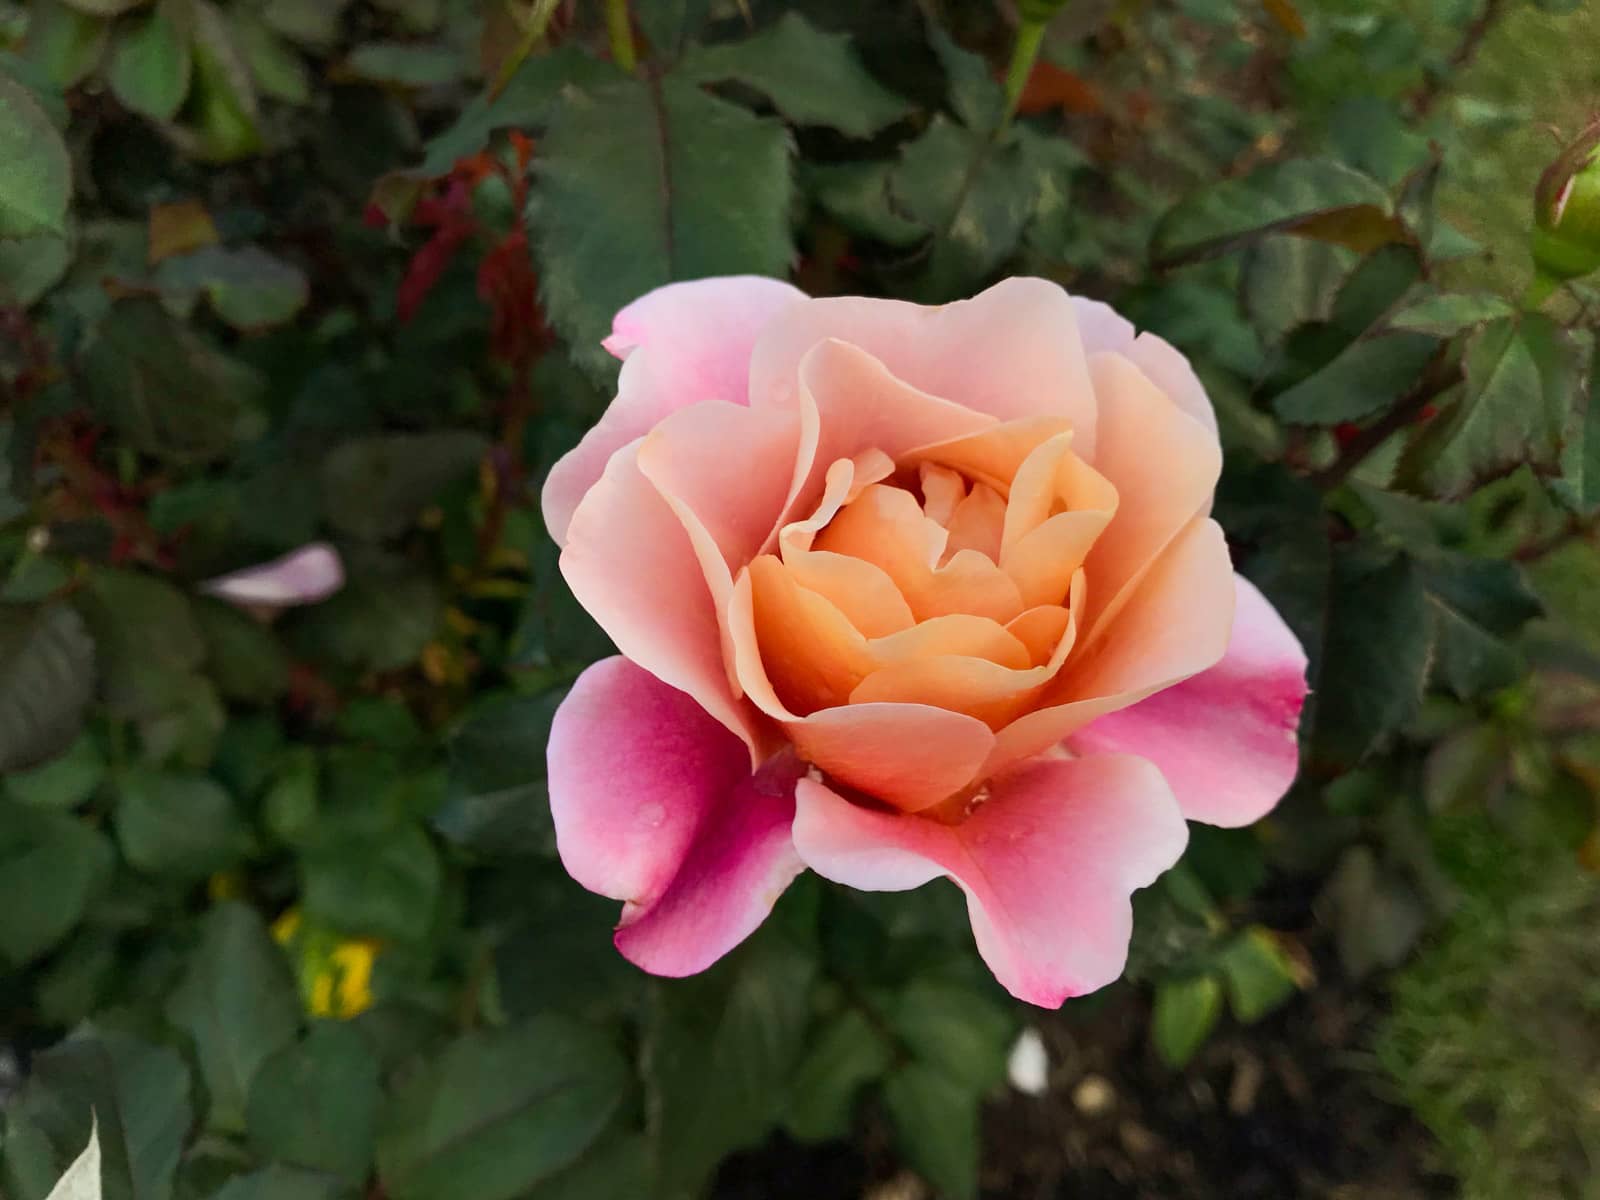 A close-up of a light pink rose with a light peach colour towards the centre